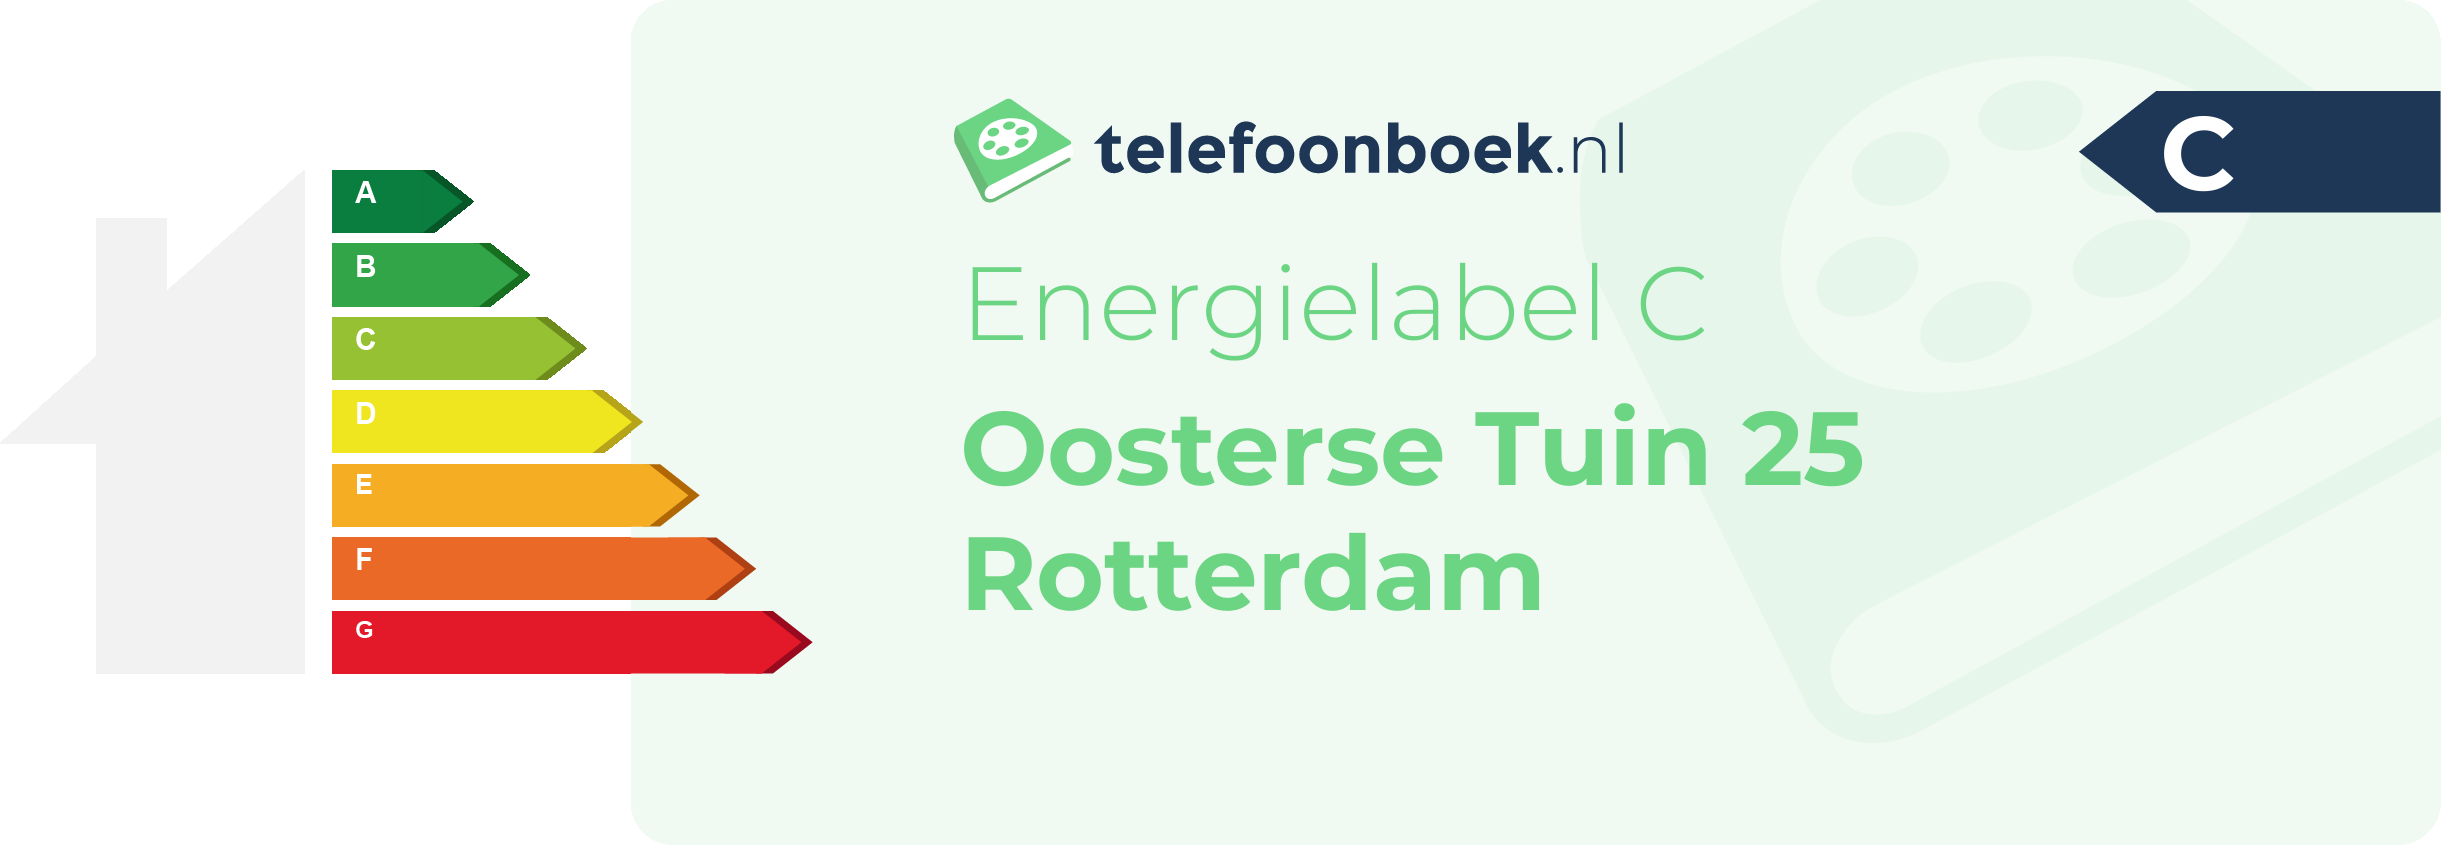 Energielabel Oosterse Tuin 25 Rotterdam